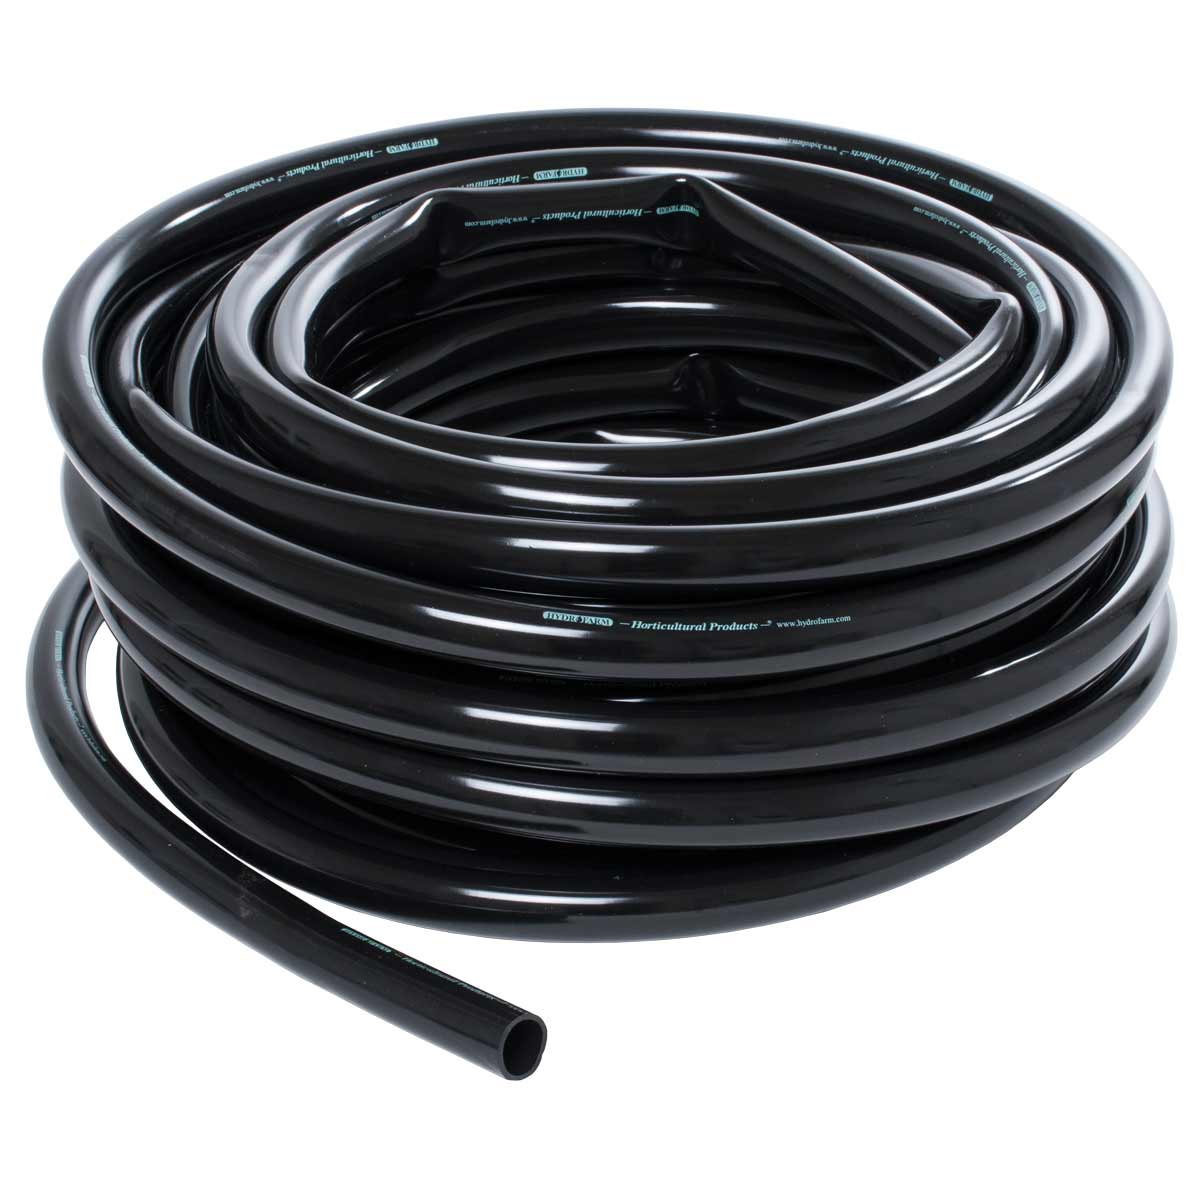 Firm Bendable Welding Polyurethane Opaque Black Inch Tubing for Air and Water Applications Inner Diameter 1/4 Outer Diameter 3/8-10 ft 